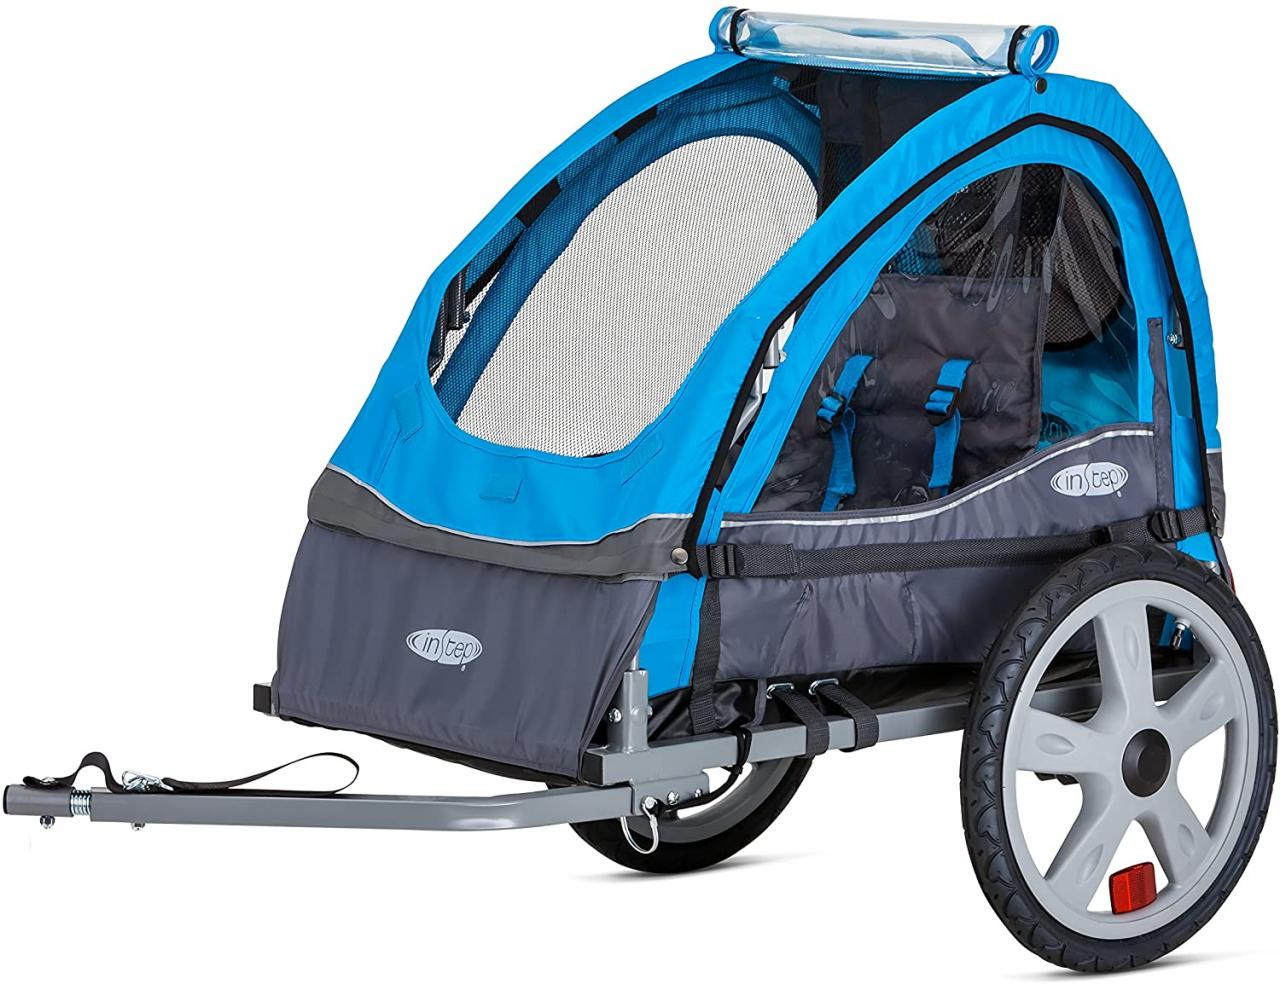 instep two seat bicycle trailer Shop Clothing & Shoes Online